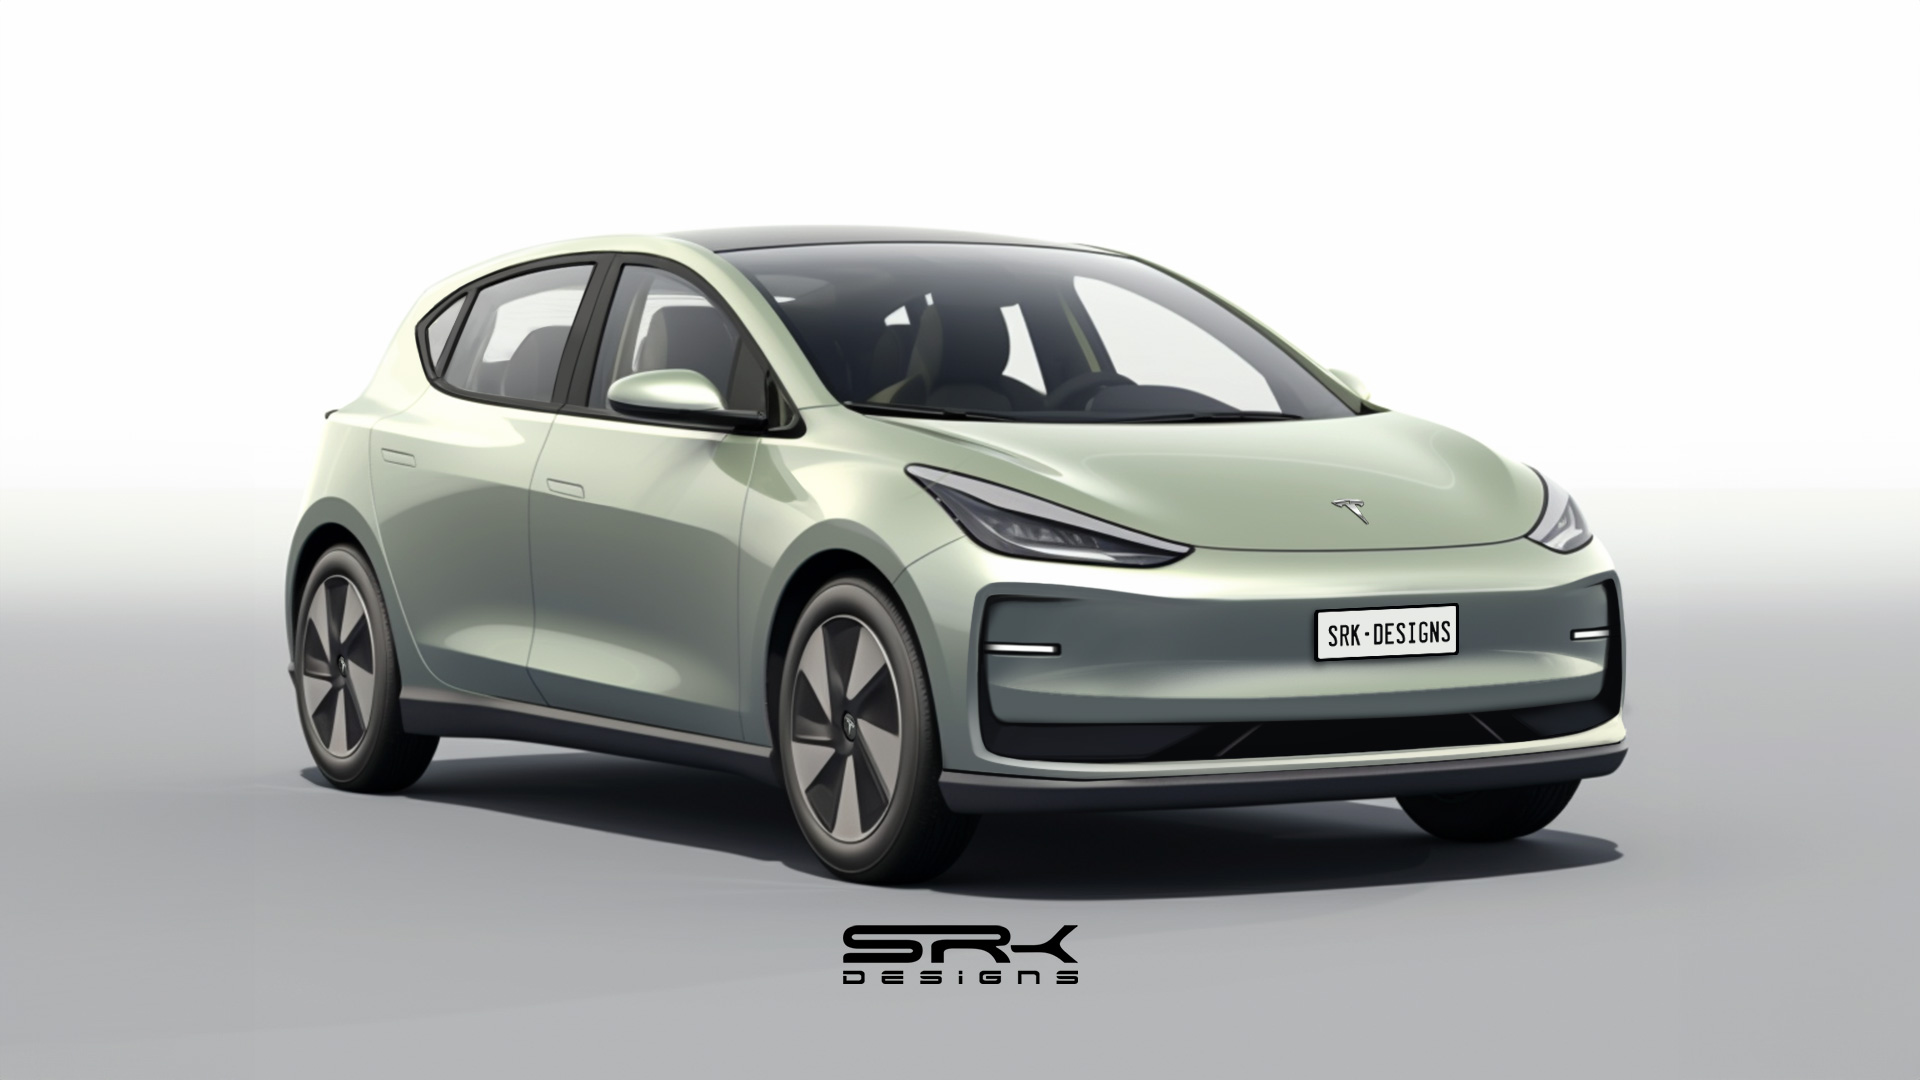 https://s1.cdn.autoevolution.com/images/news/the-2025-tesla-model-2-hatchback-would-be-a-steal-at-25k-even-if-it-looked-like-this-226104_1.jpg